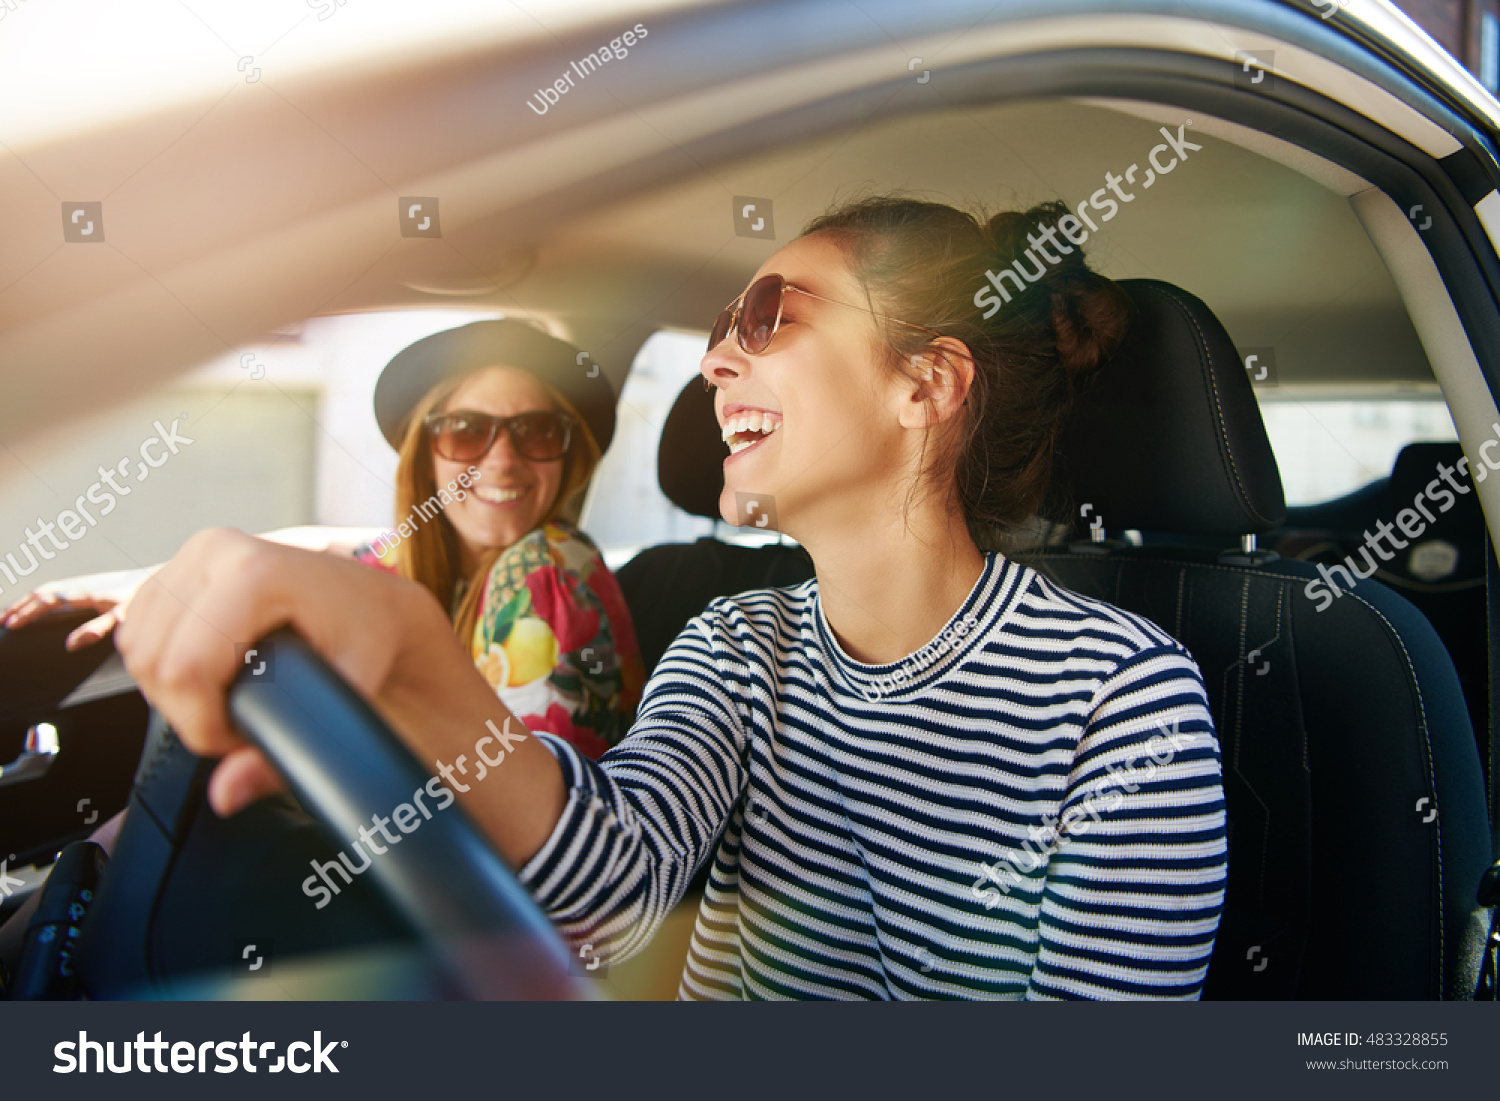 Smiling happy young woman giving her friend a lift in her car in town, profile view through the open side window with sun flare #483328855